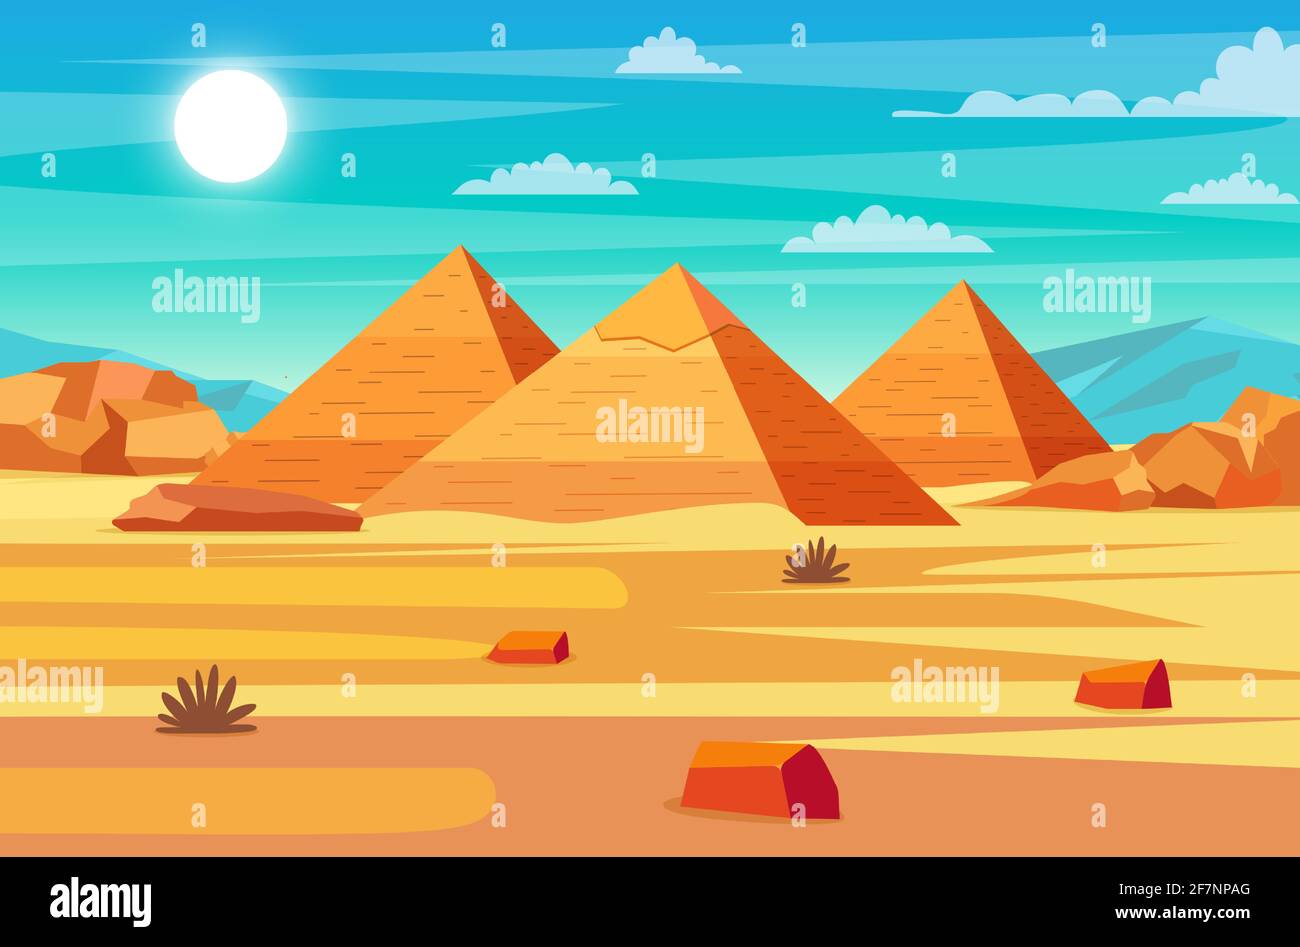 Cairo old town Stock Vector Images - Alamy